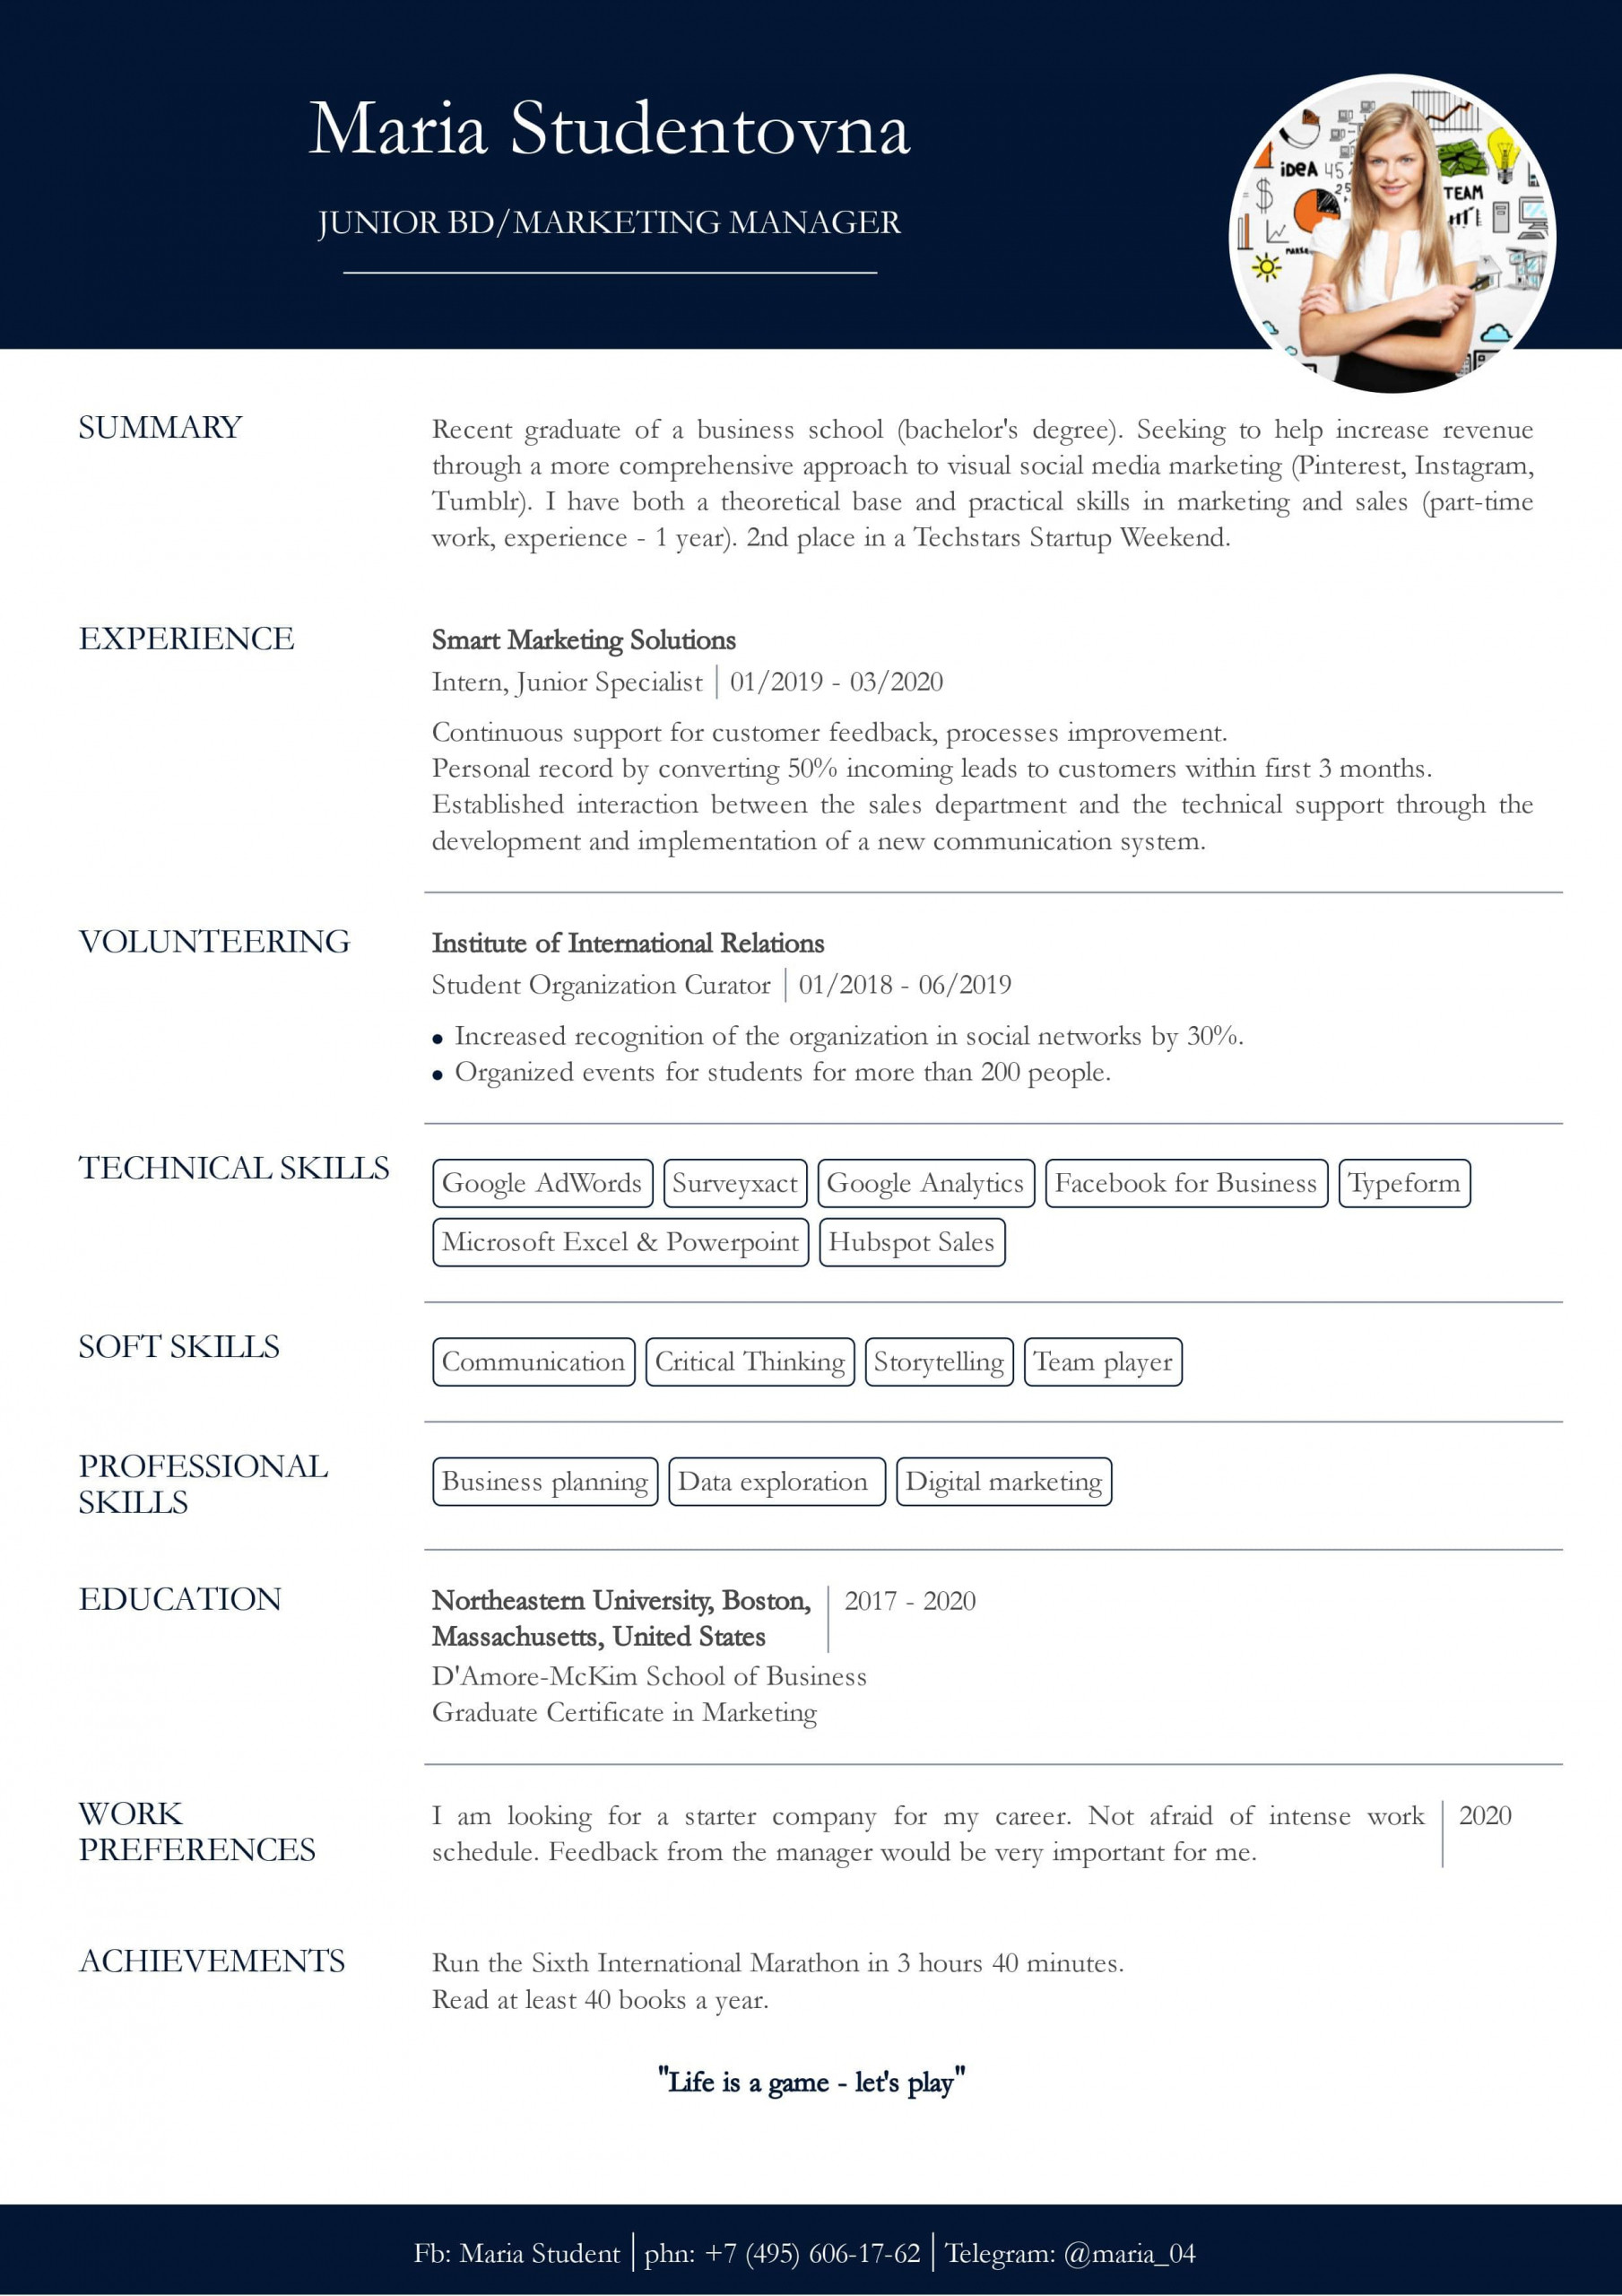 Sample Resume for Voluntee Work In It with No Experience Resume with No Work Experience. Sample for Students. – Cv2you Blog